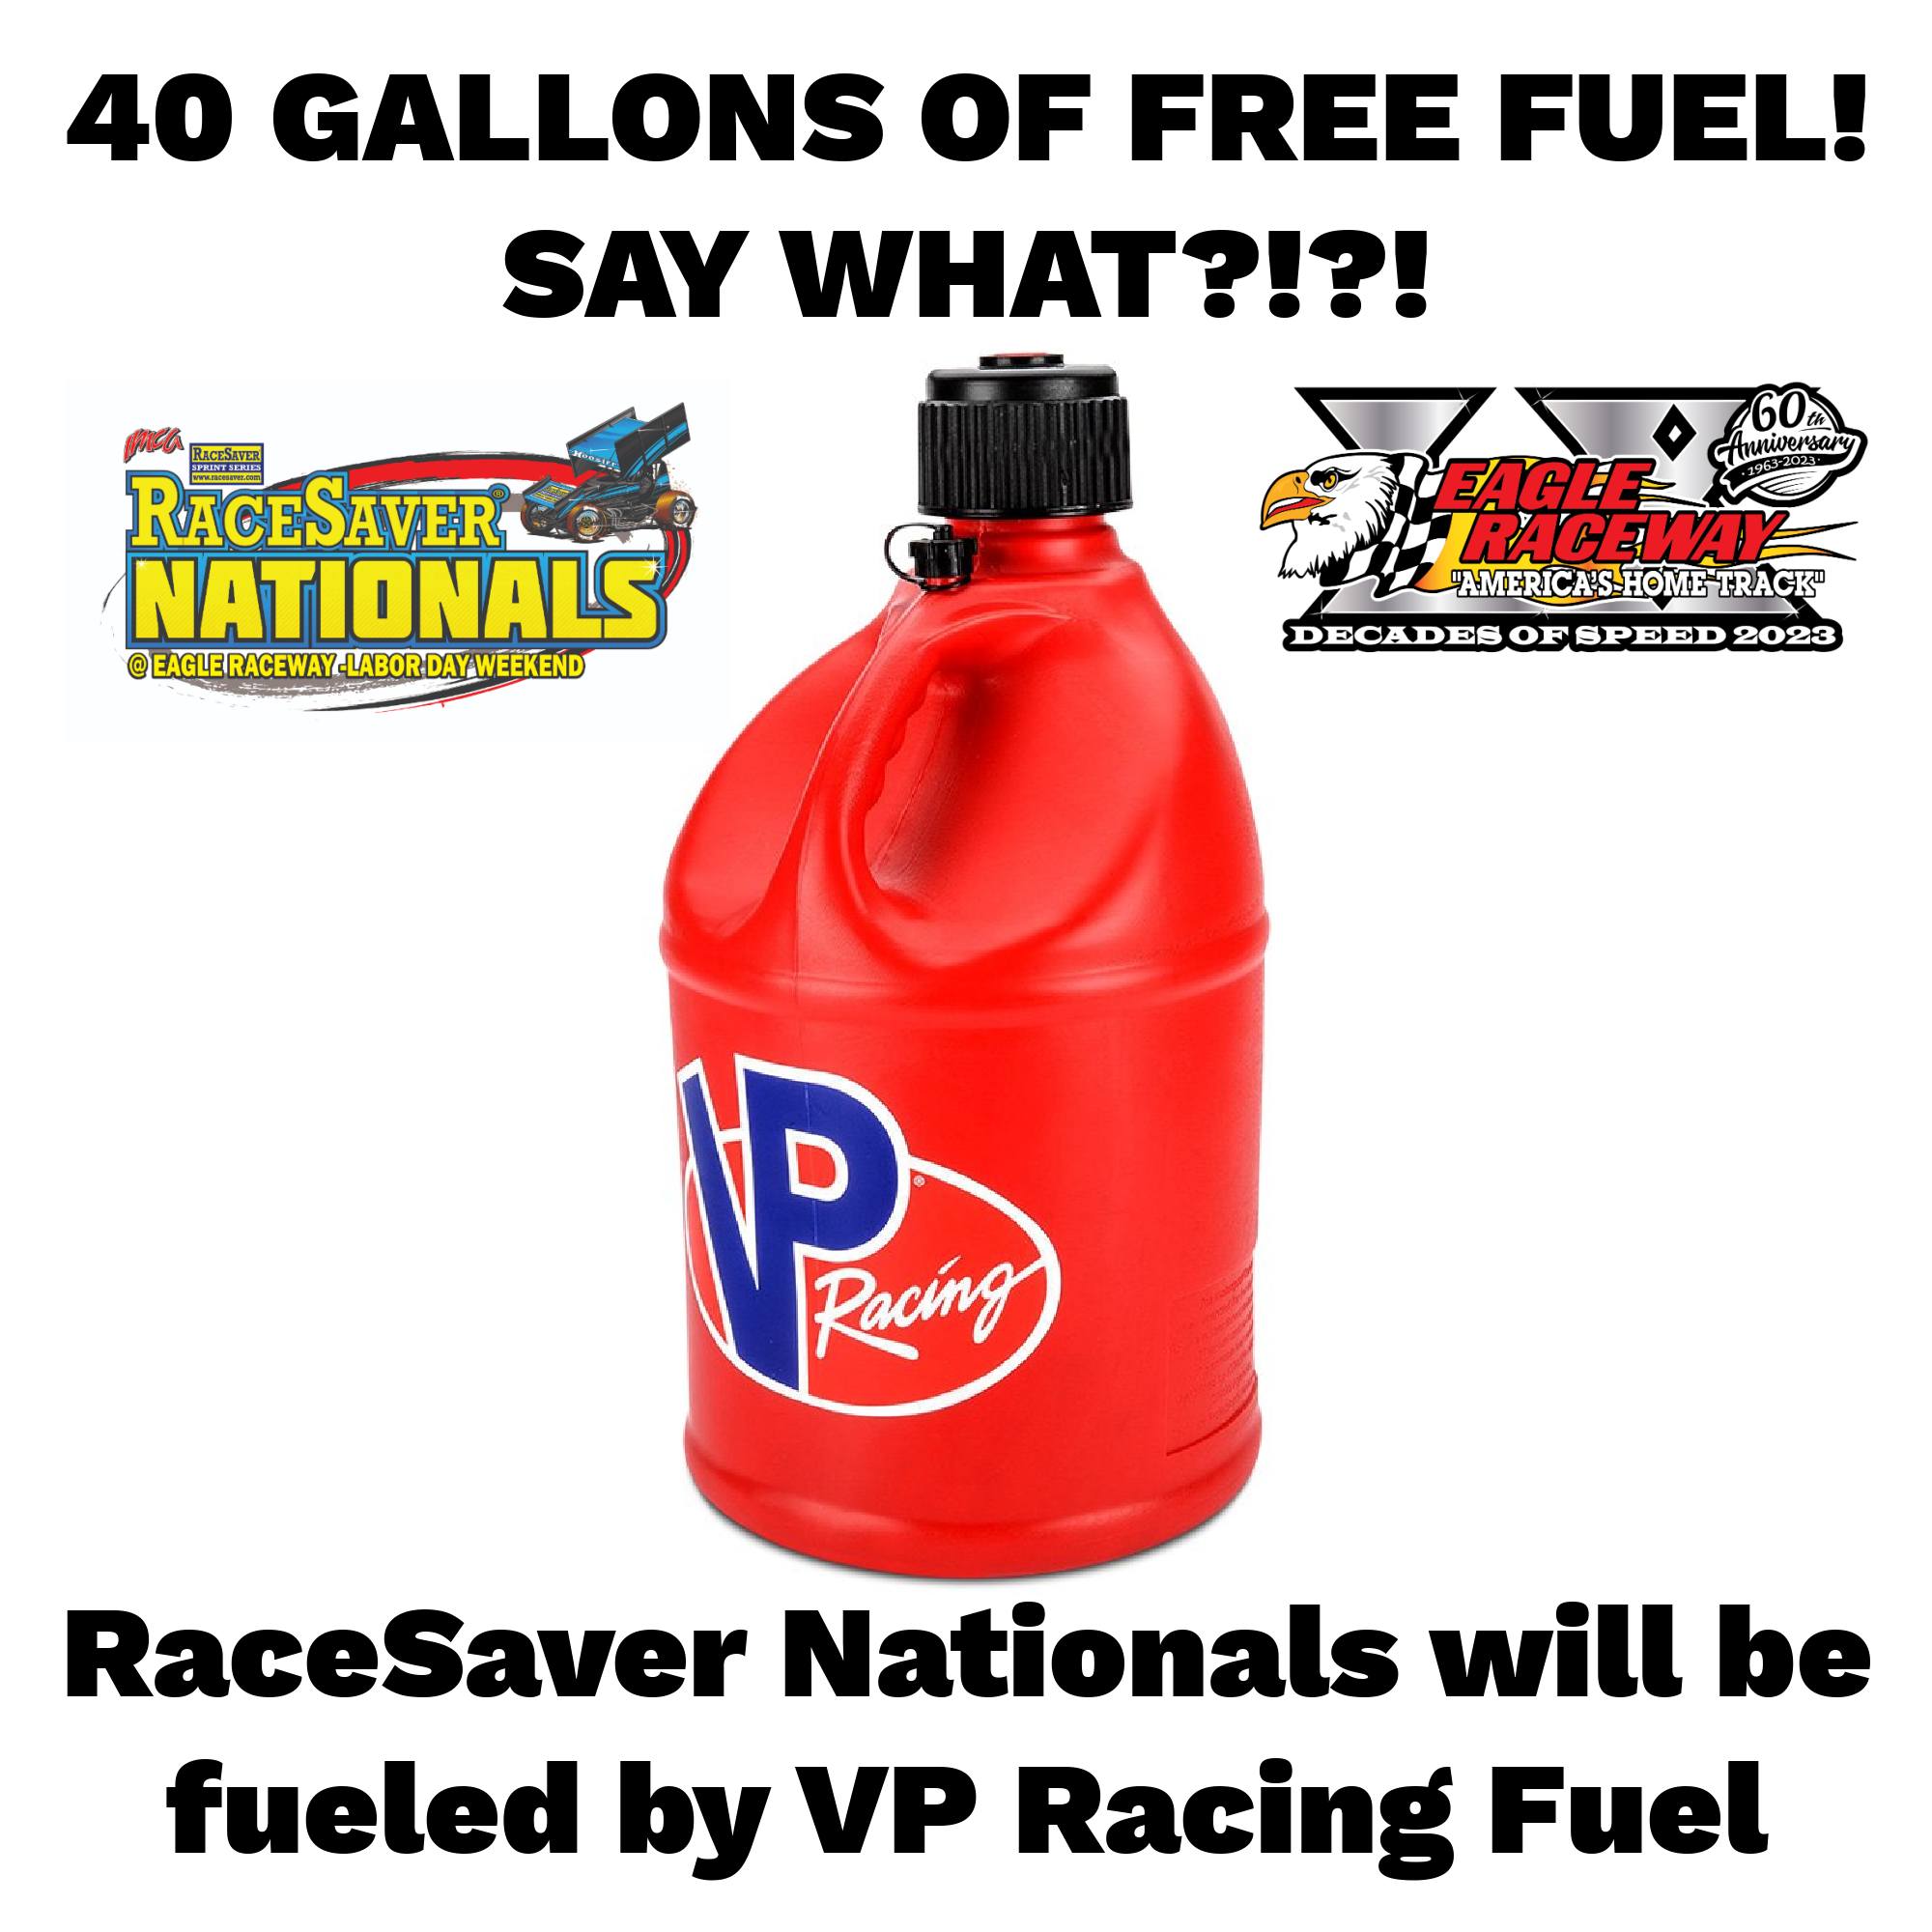 40 Gallons of Free fuel at RACESAVER NATIONALS Eagle, NE Aug 31st-Sep 3rd